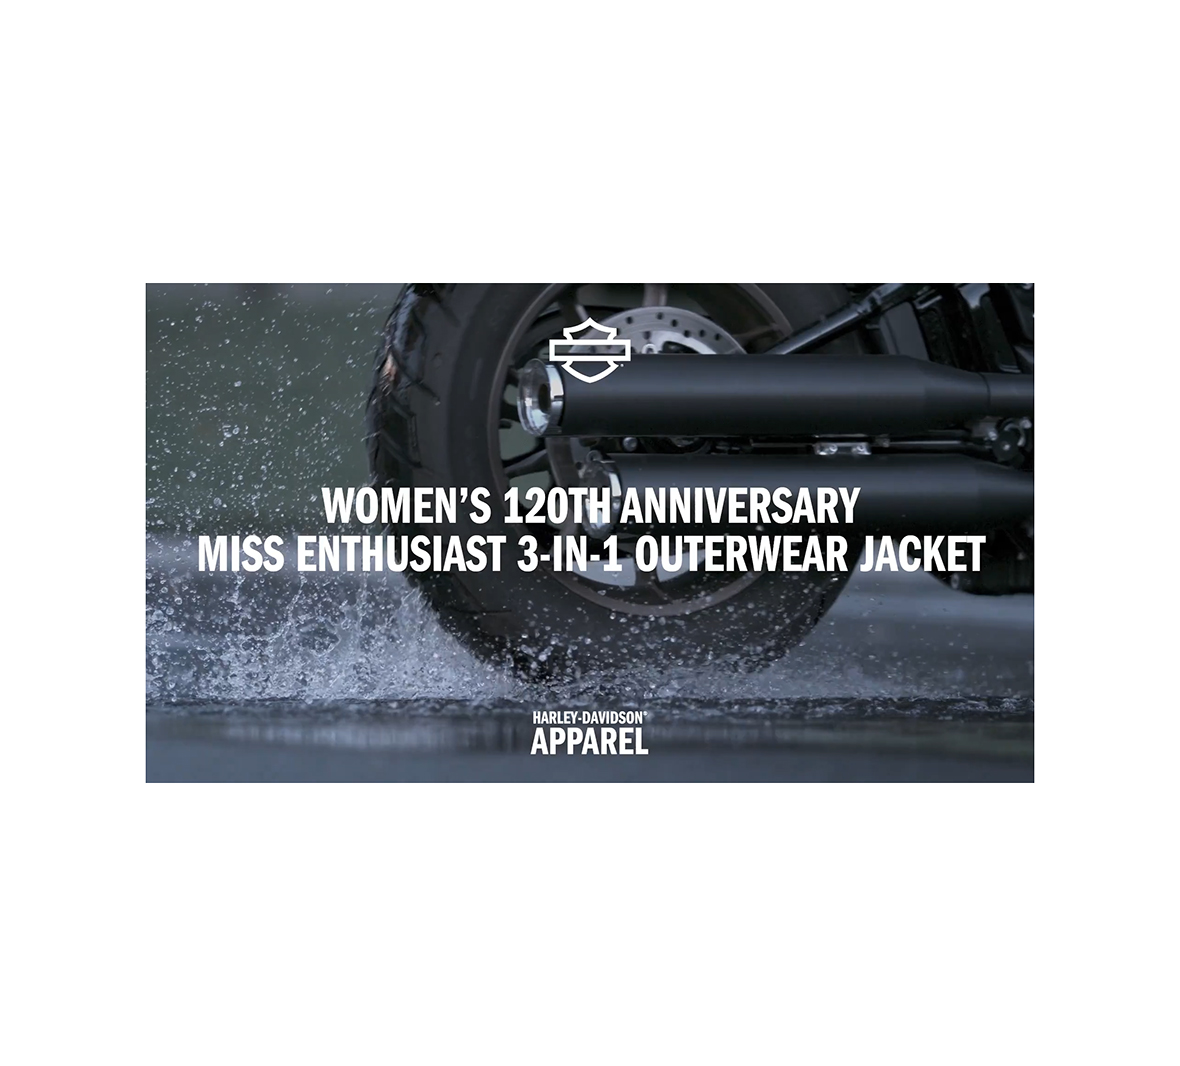 Women's 120th Anniversary Miss Enthusiast 3-in-1 Outerwear Jacket